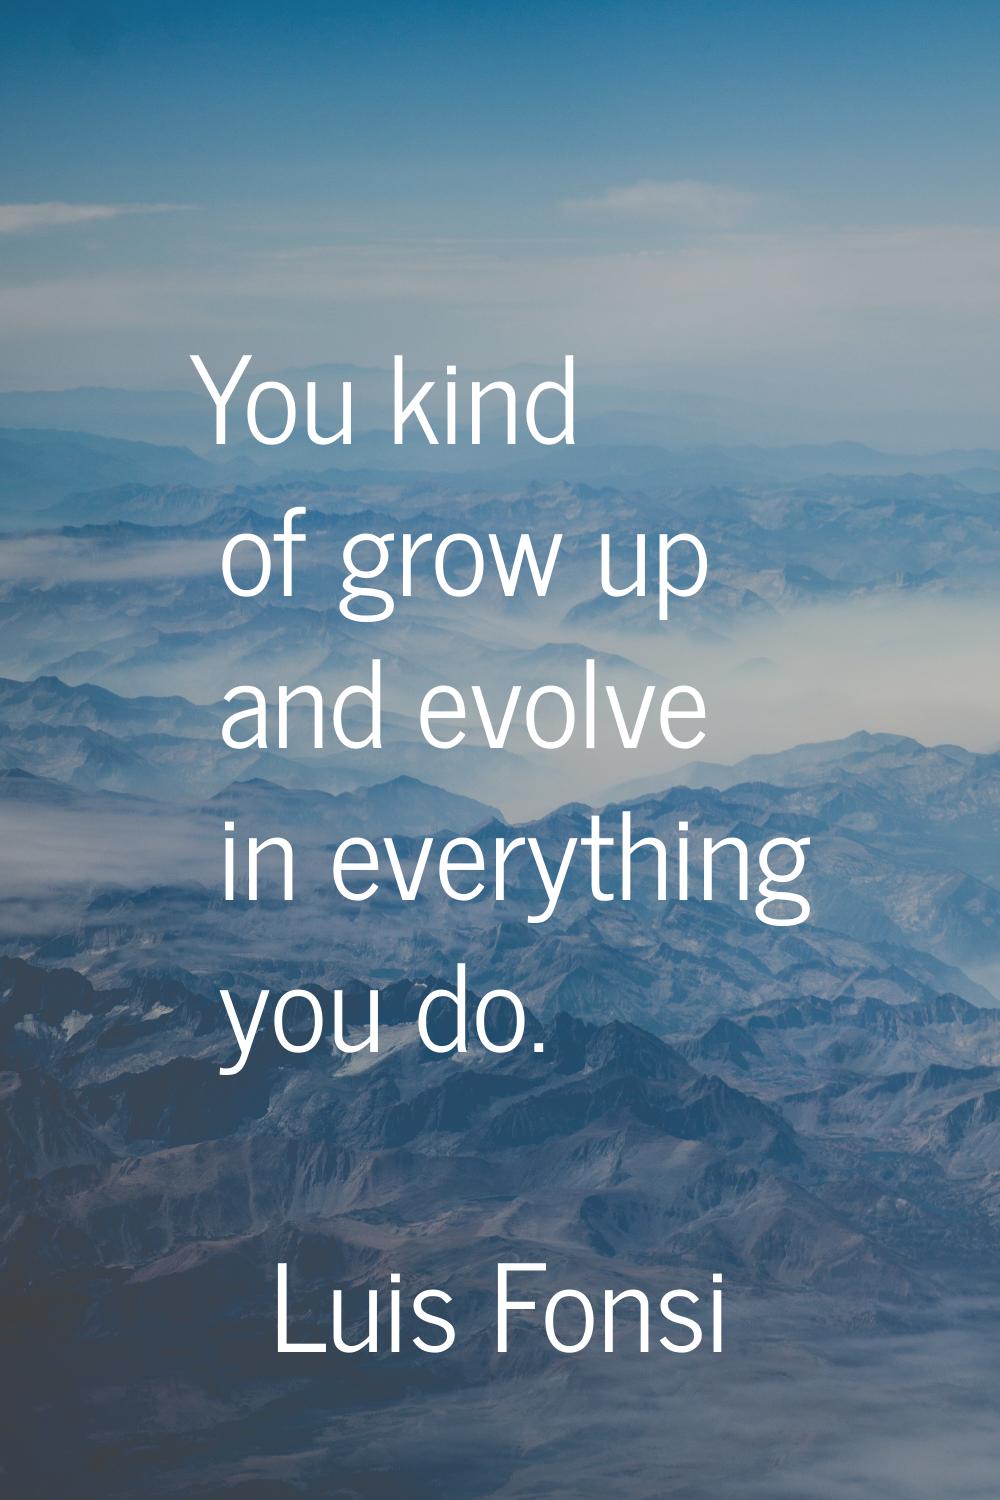 You kind of grow up and evolve in everything you do.